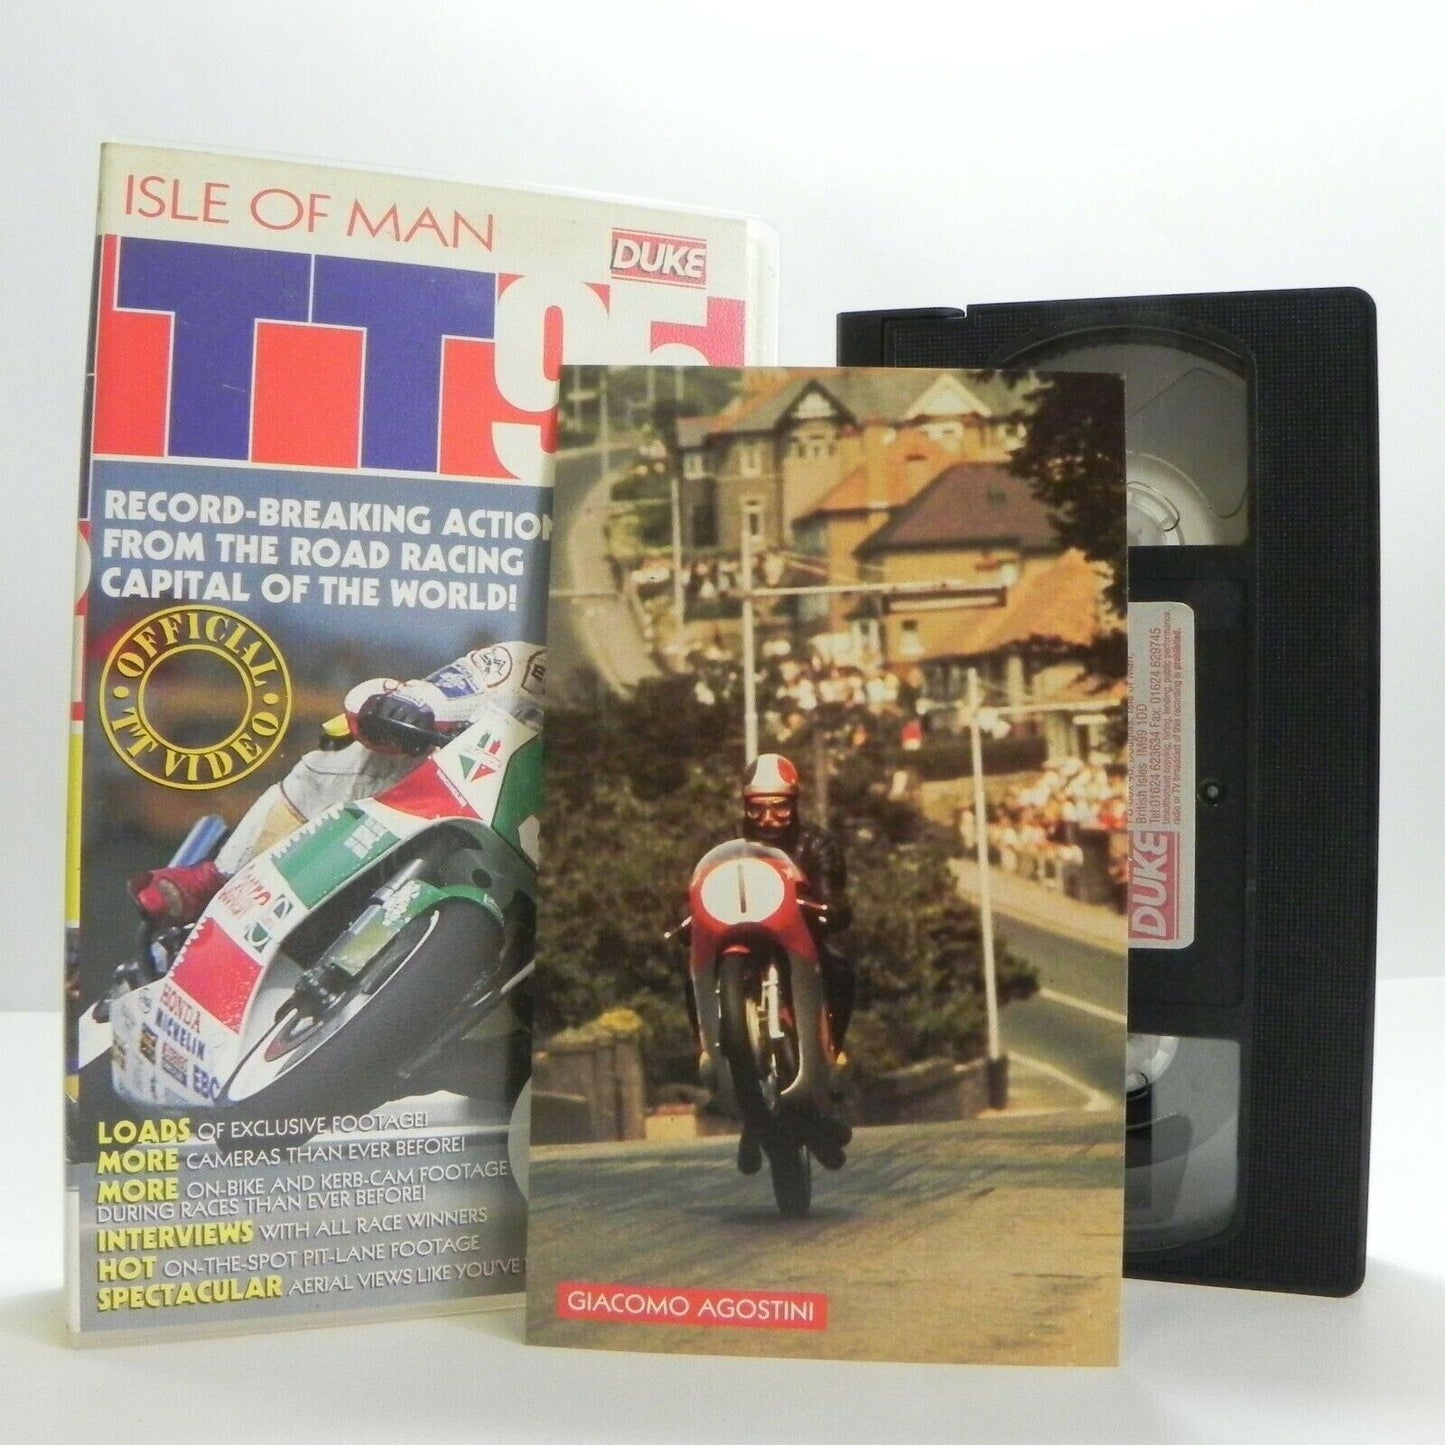 TT Superbike 95 - Racing - Action - Superb - Awesome - Spectacular - Pal VHS-